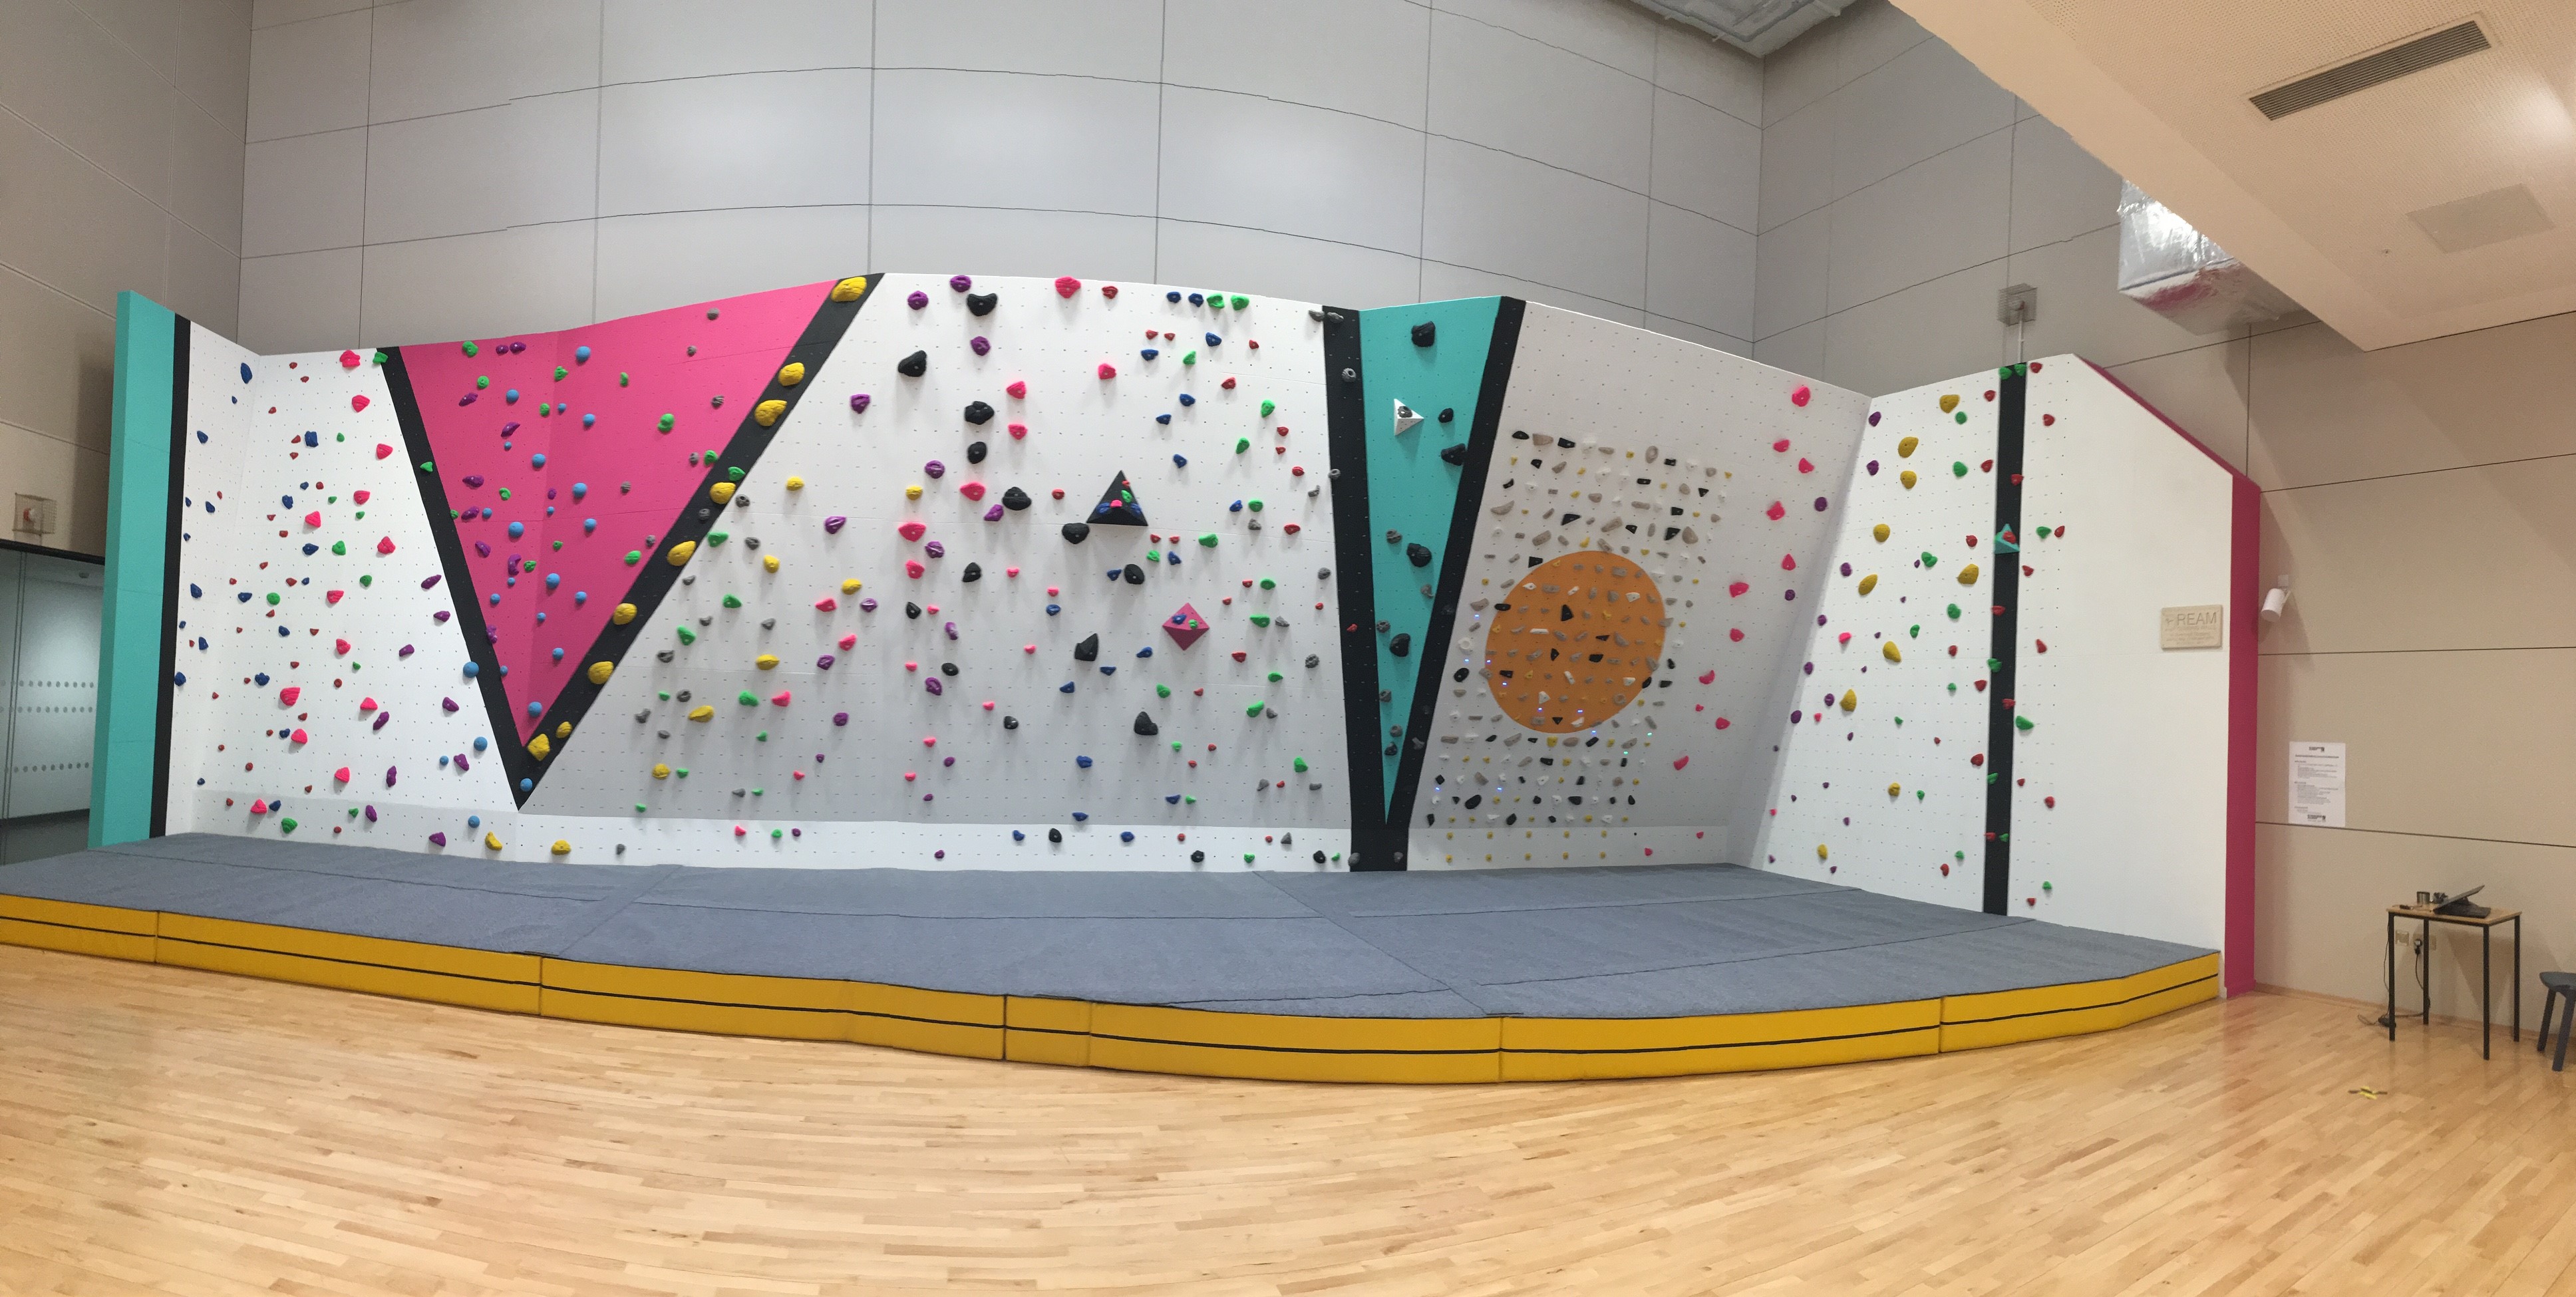 The climbing wall at Inverurie Community Campus